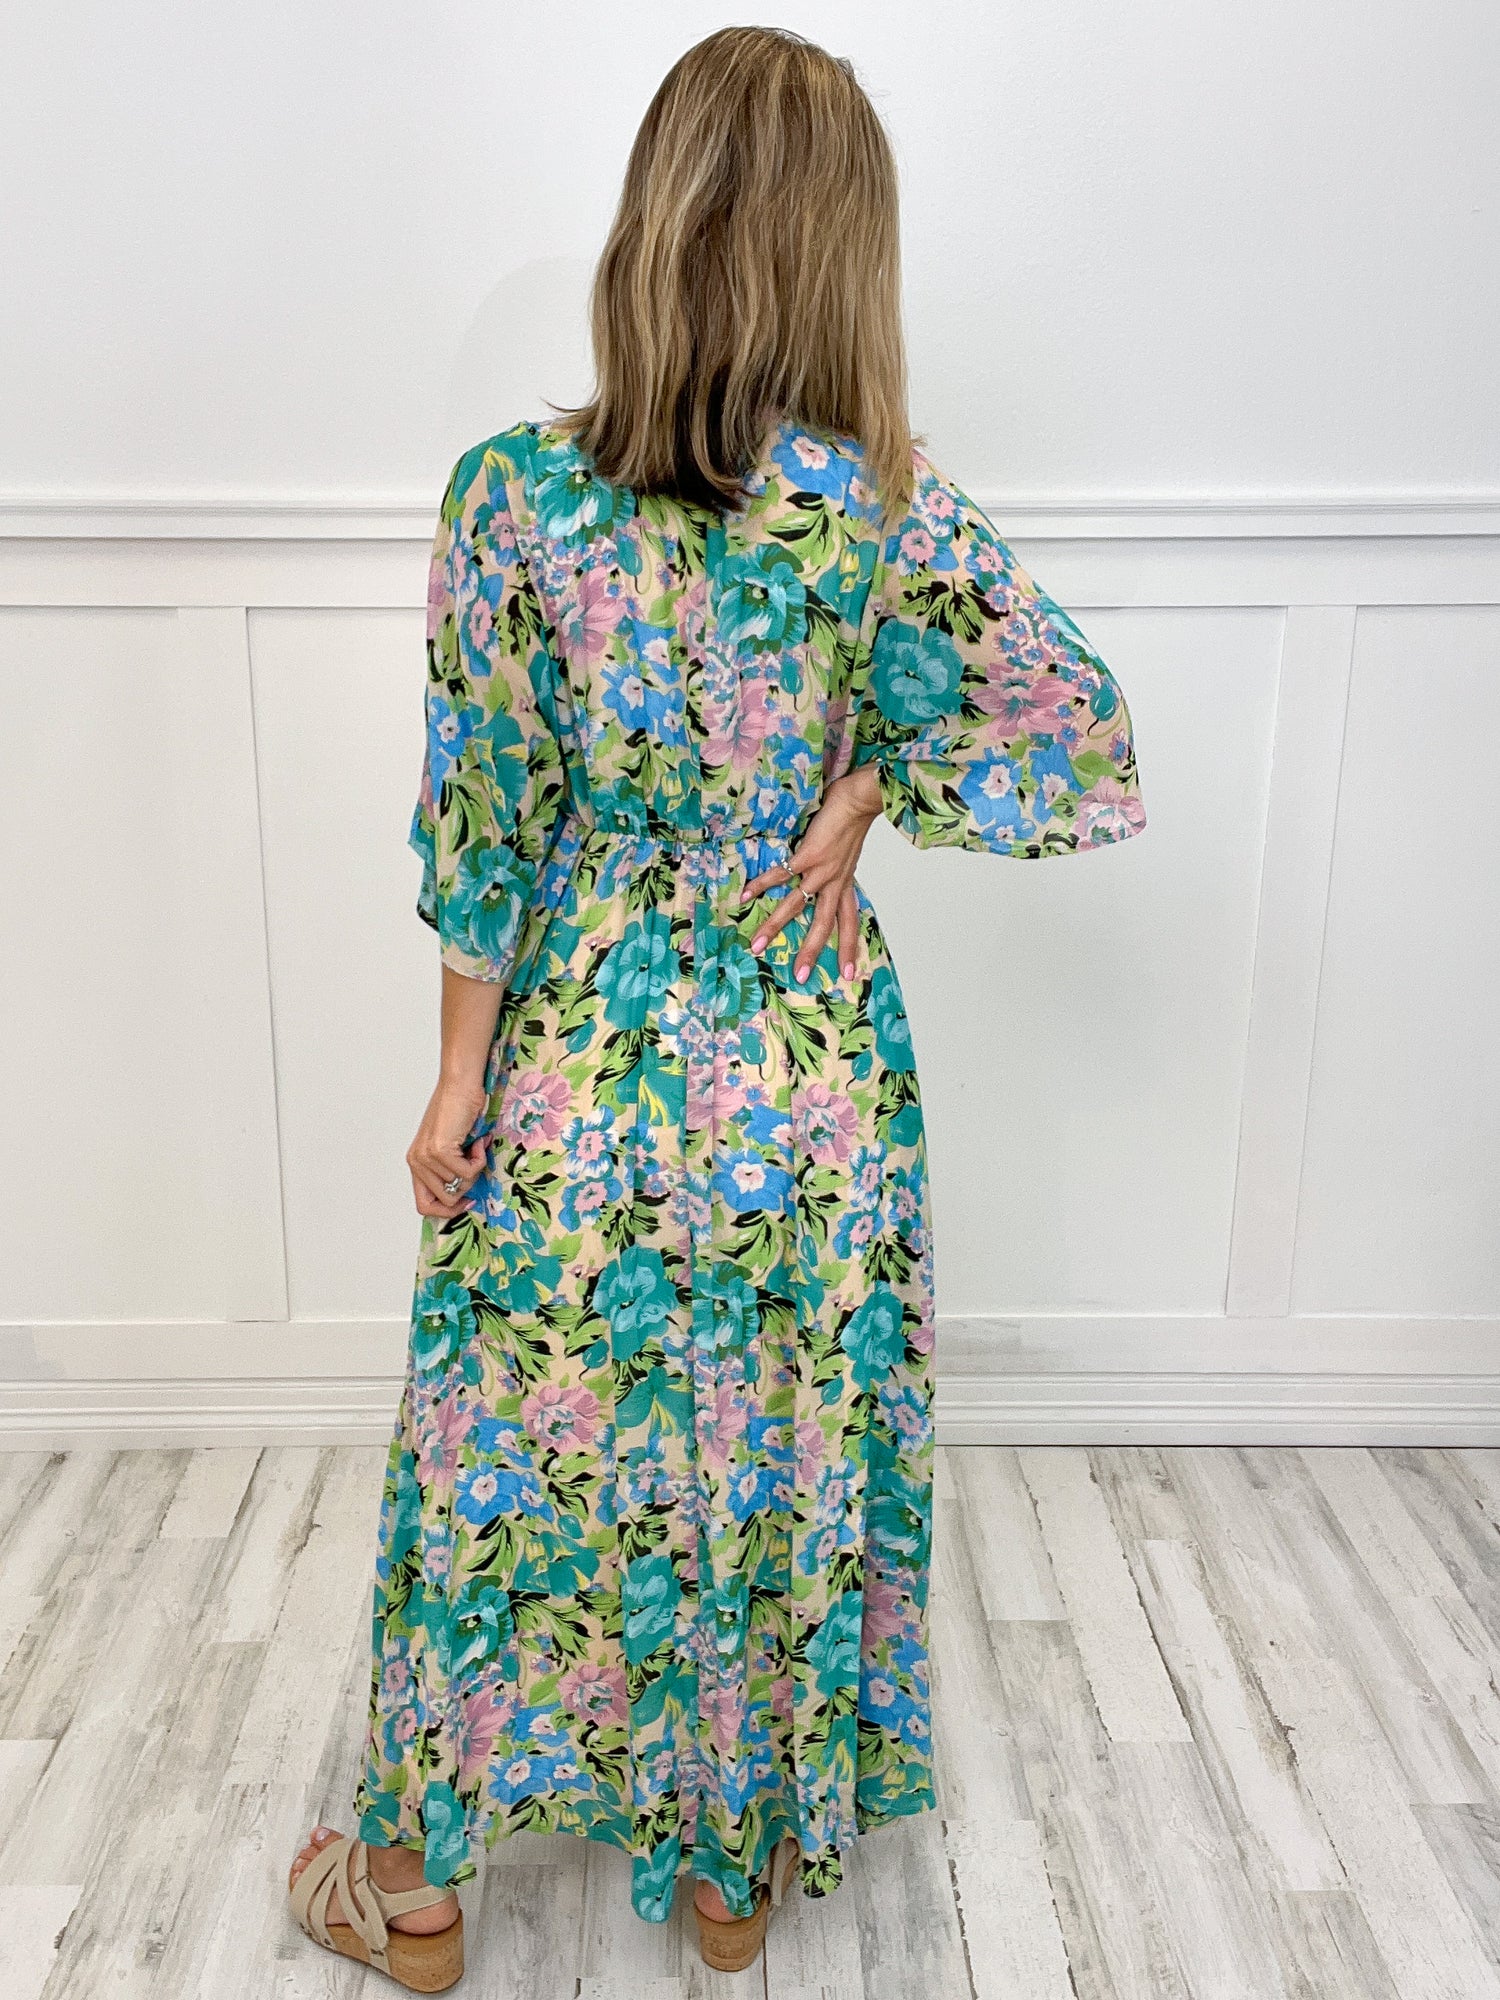 Chase After You Floral Dress